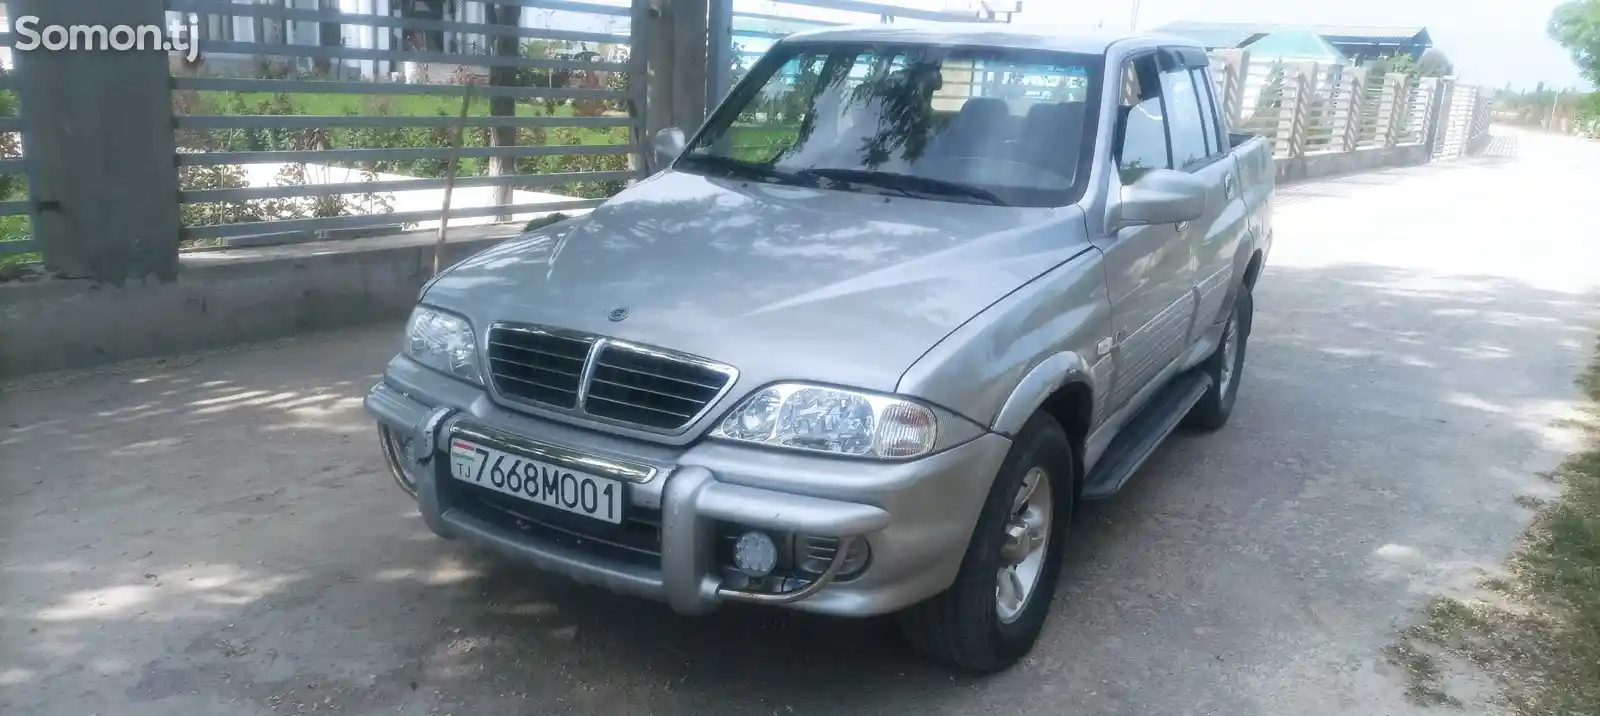 Ssang Yong Musso Sport, 2006-1